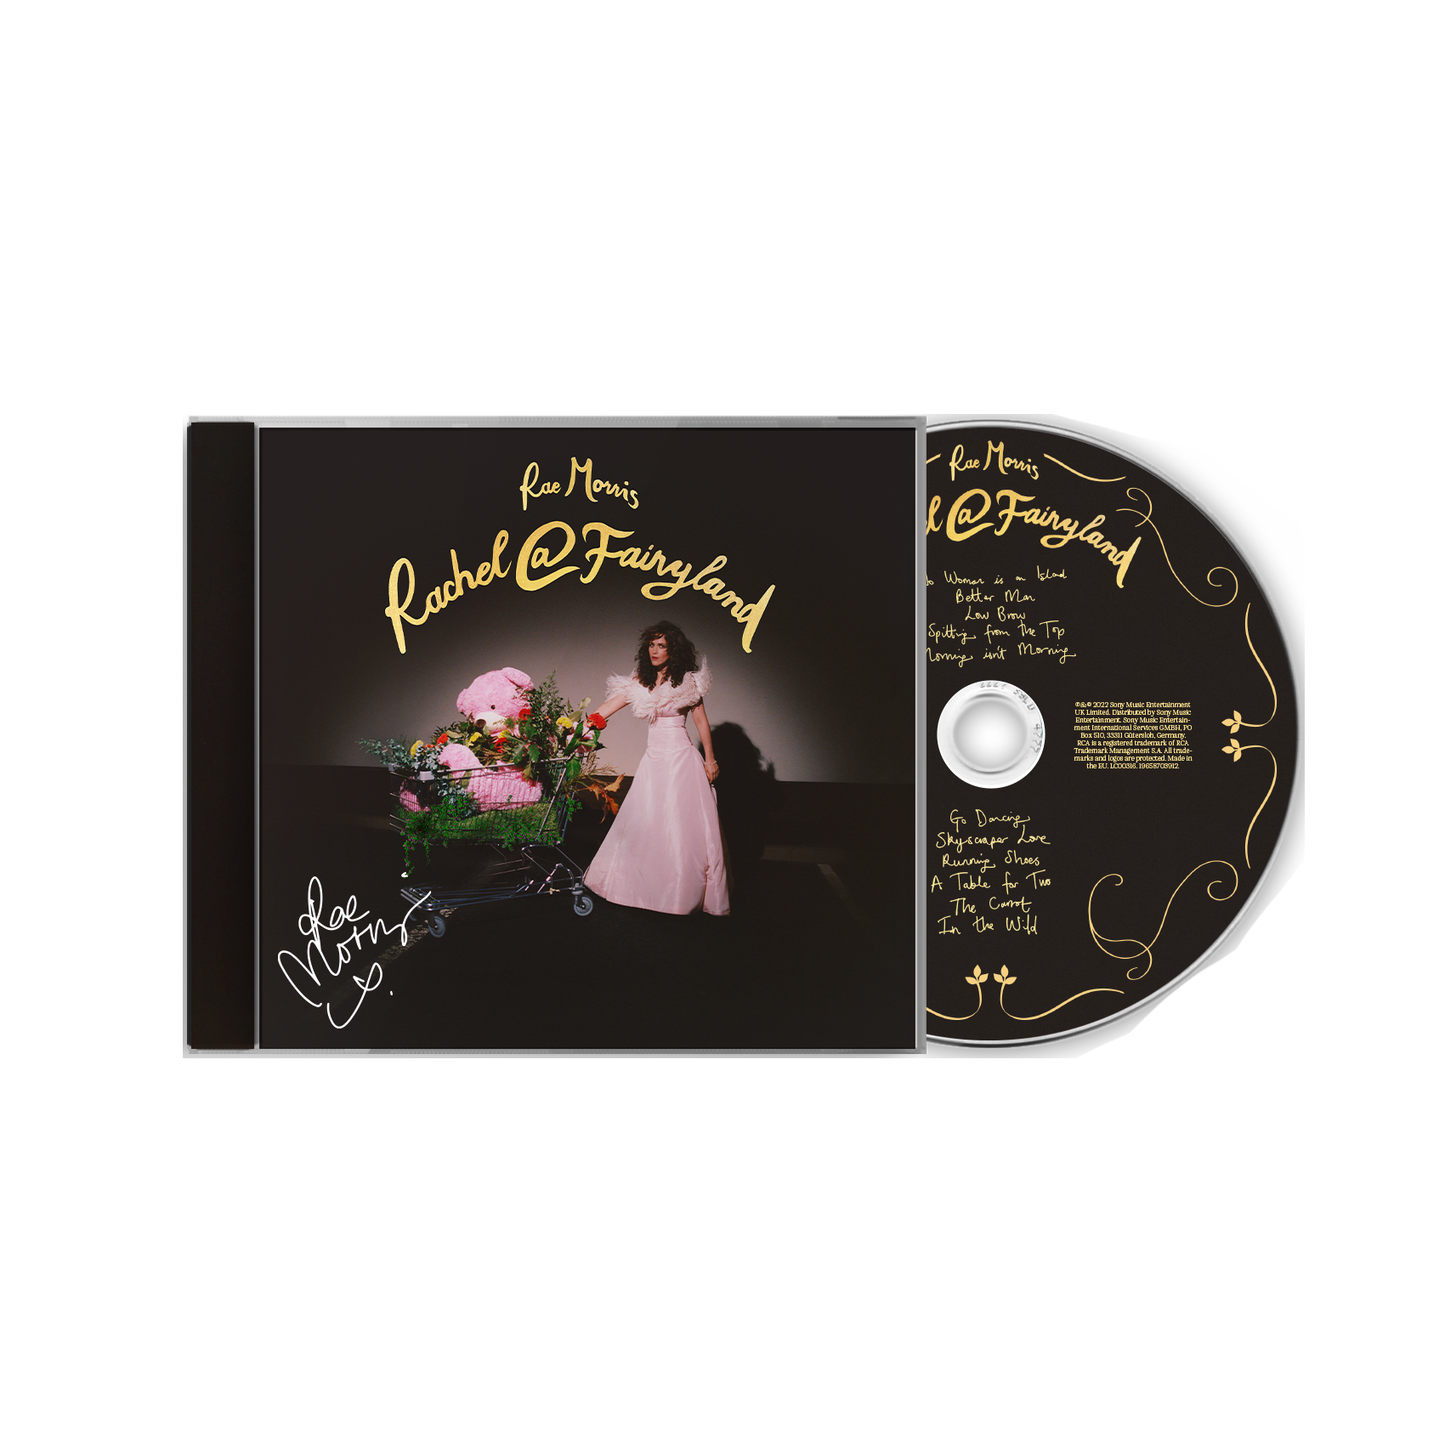 Rachel@Fairyland (Exclusive Limited Edition Signed CD)